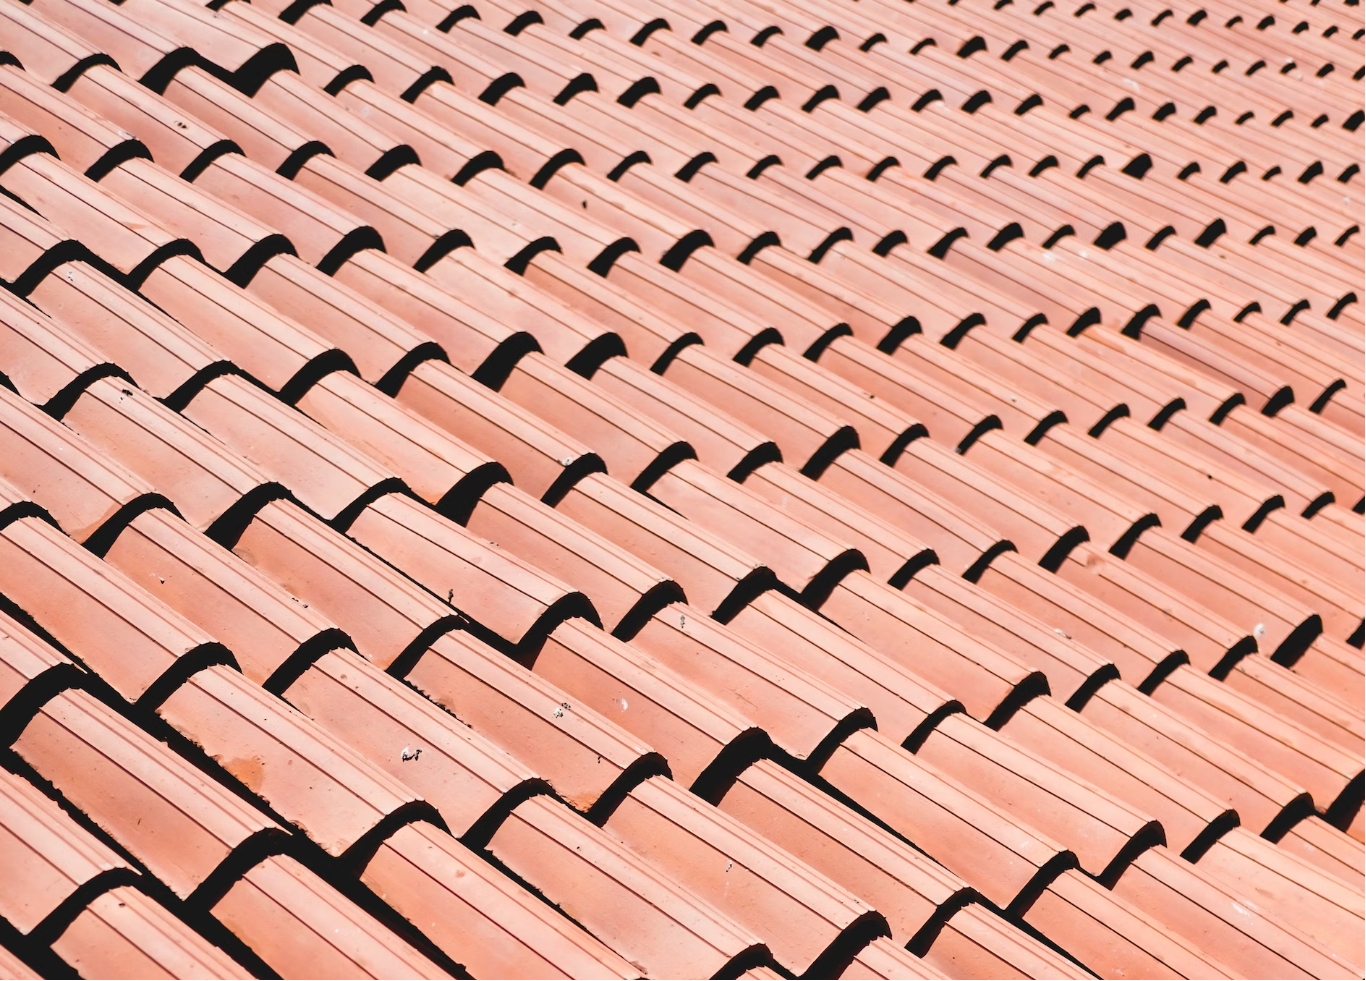 A photo showing a roof with red tiles.